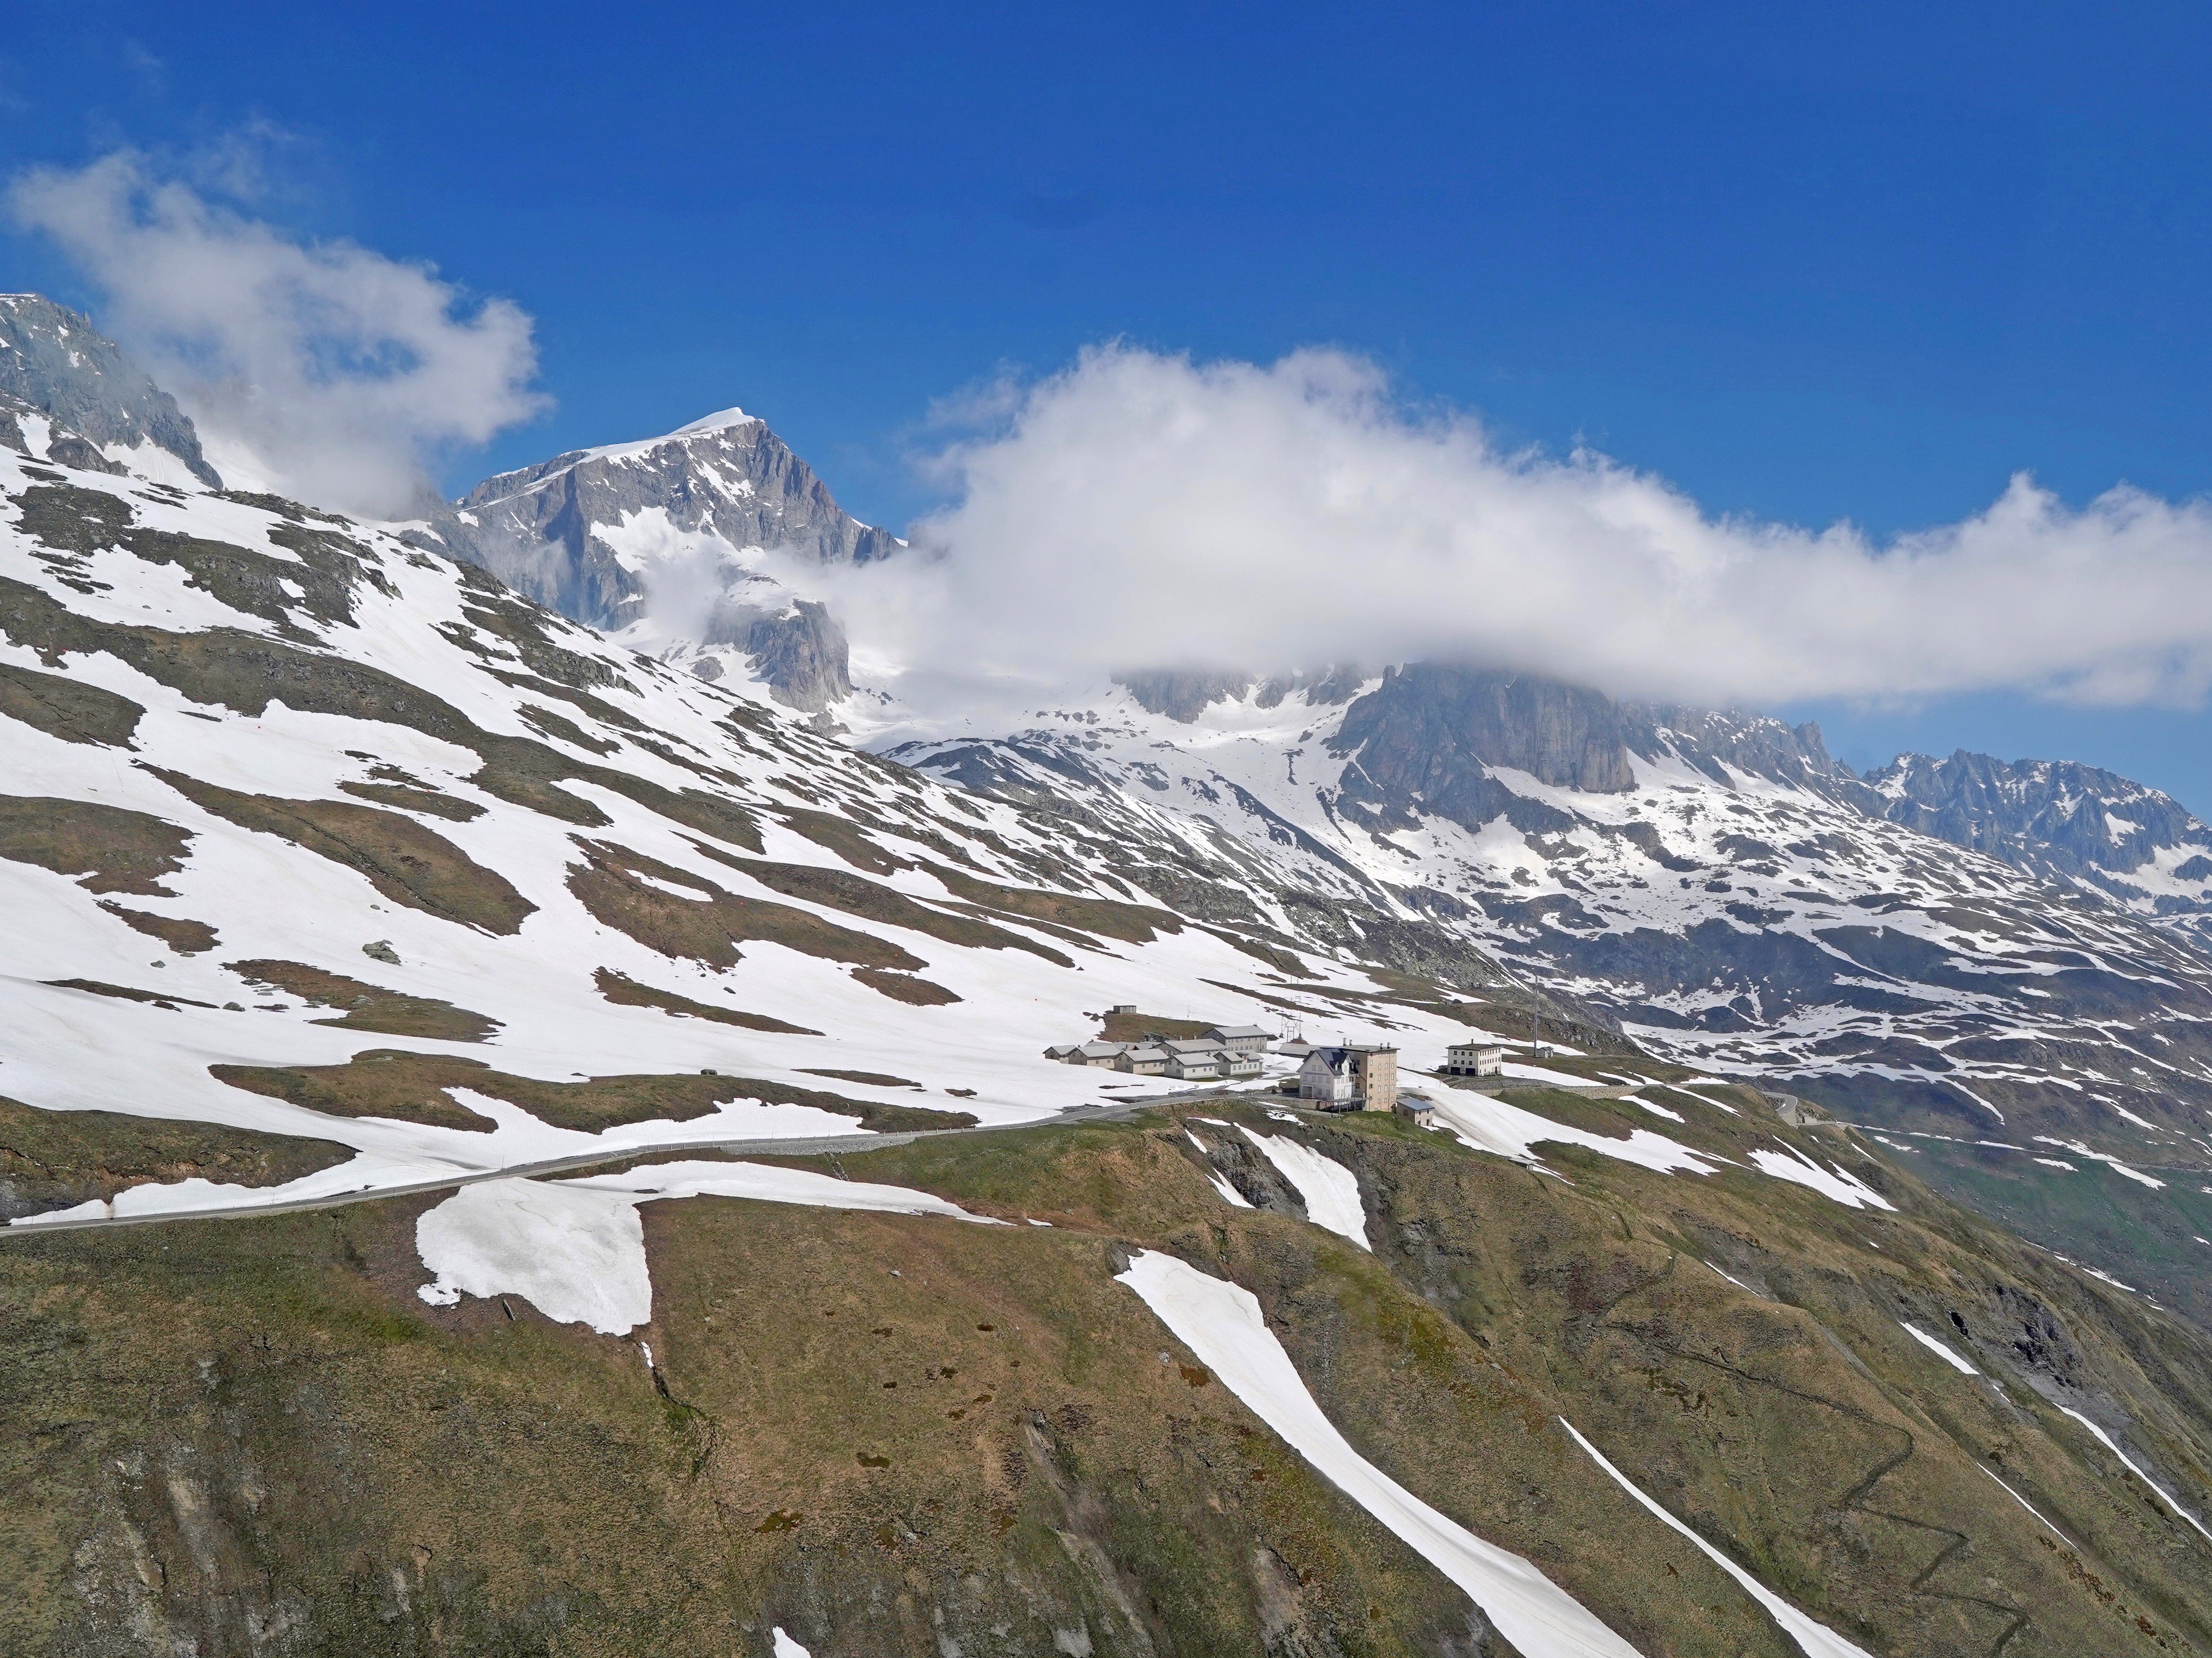 There is a clear trend towards earlier snowmelt at elevations between 1,000 and 2,500 metres. A first few spots at 2,500 metres are already snow-free in April 2020